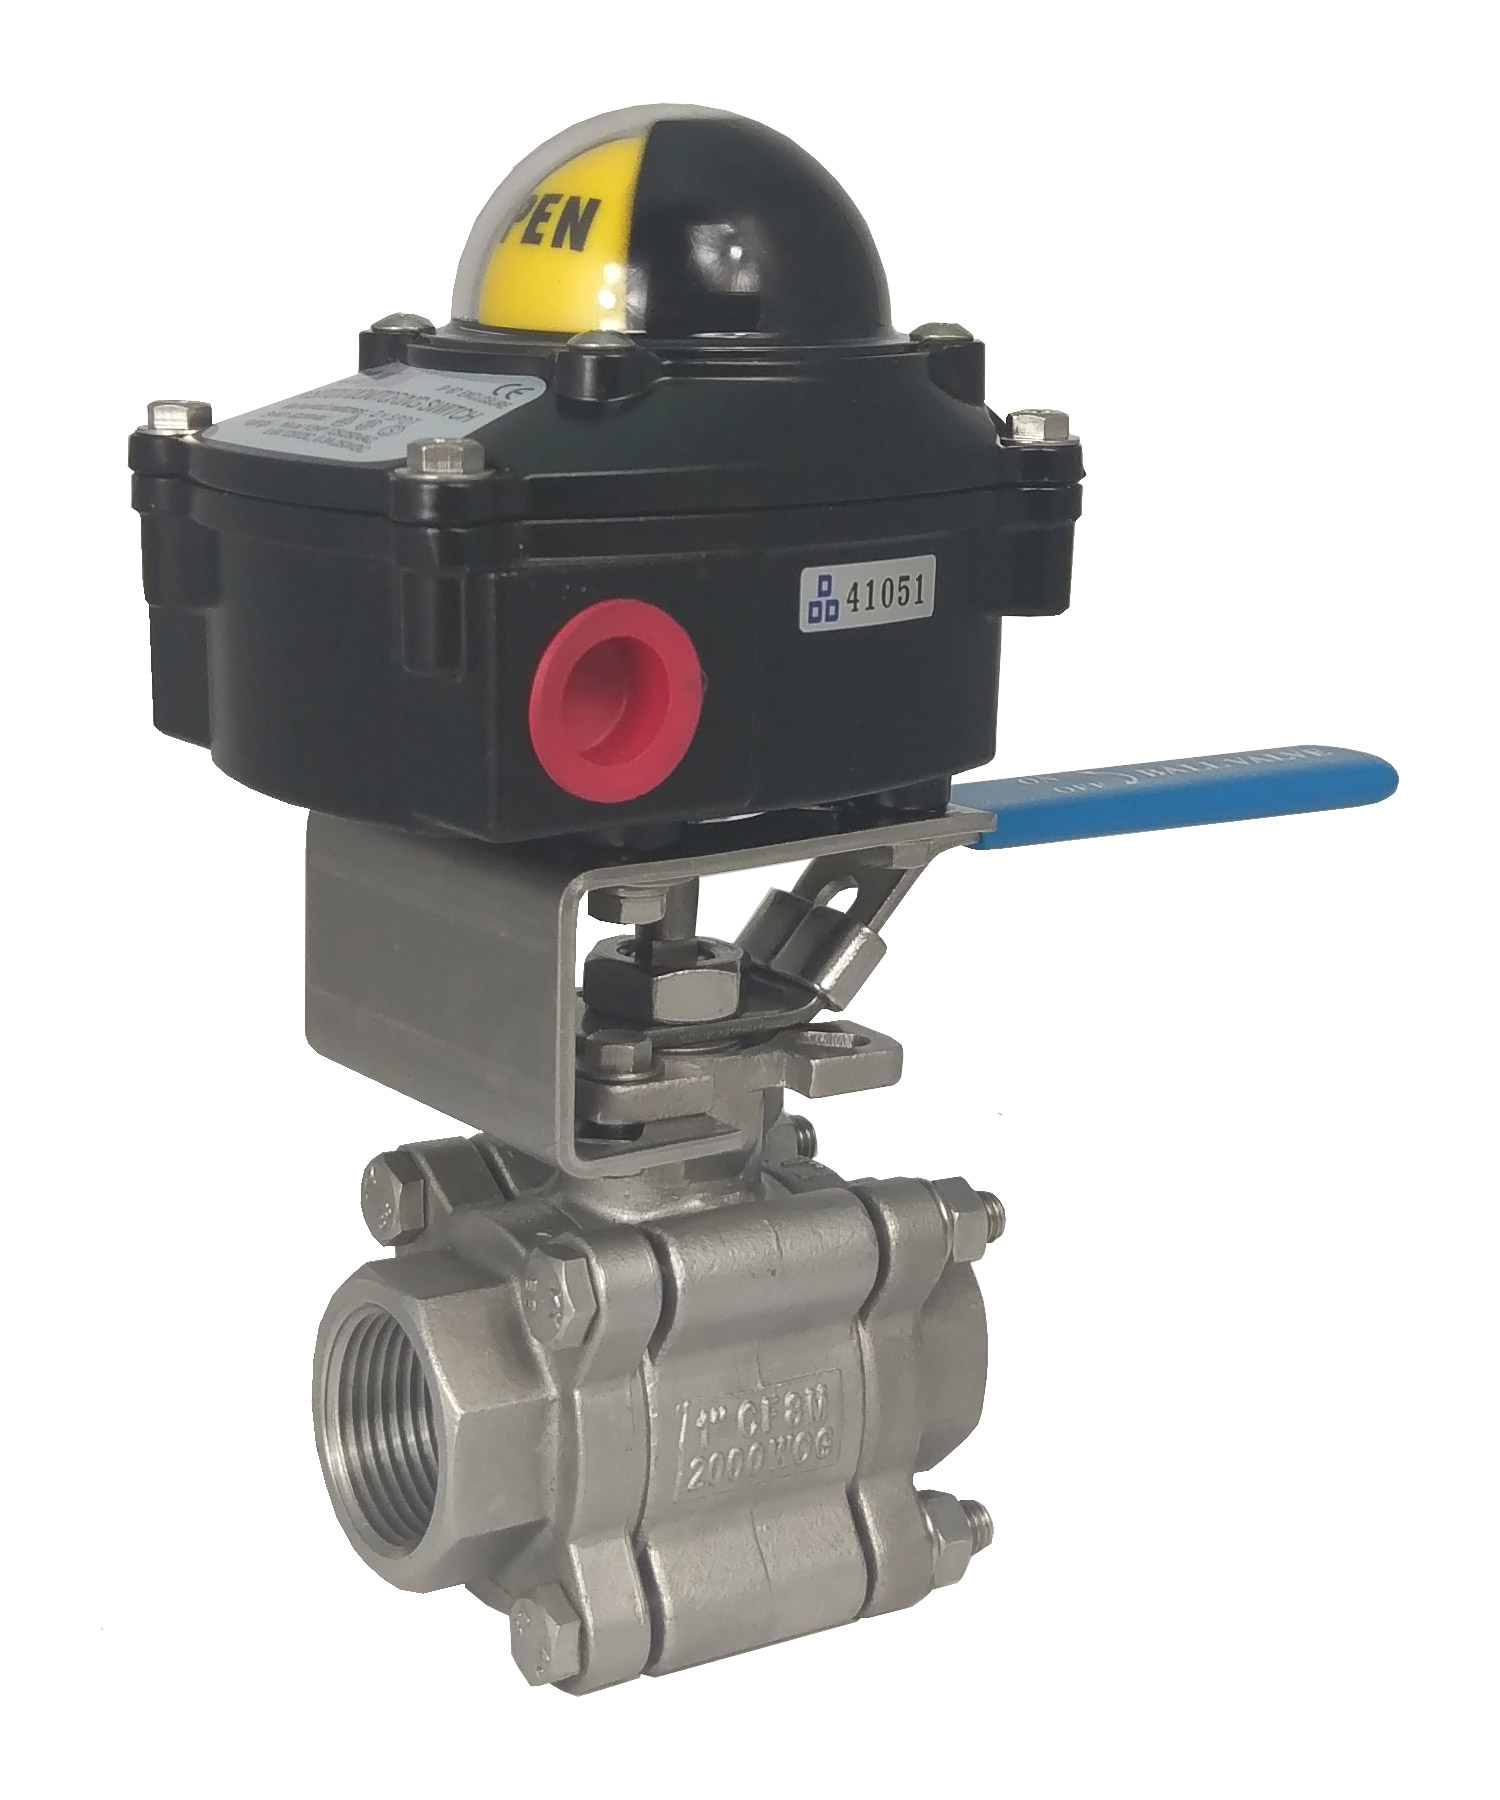 SINGLE Acting Pneumatic Actuator With Ball Valvemanual ball valve with limit switch box